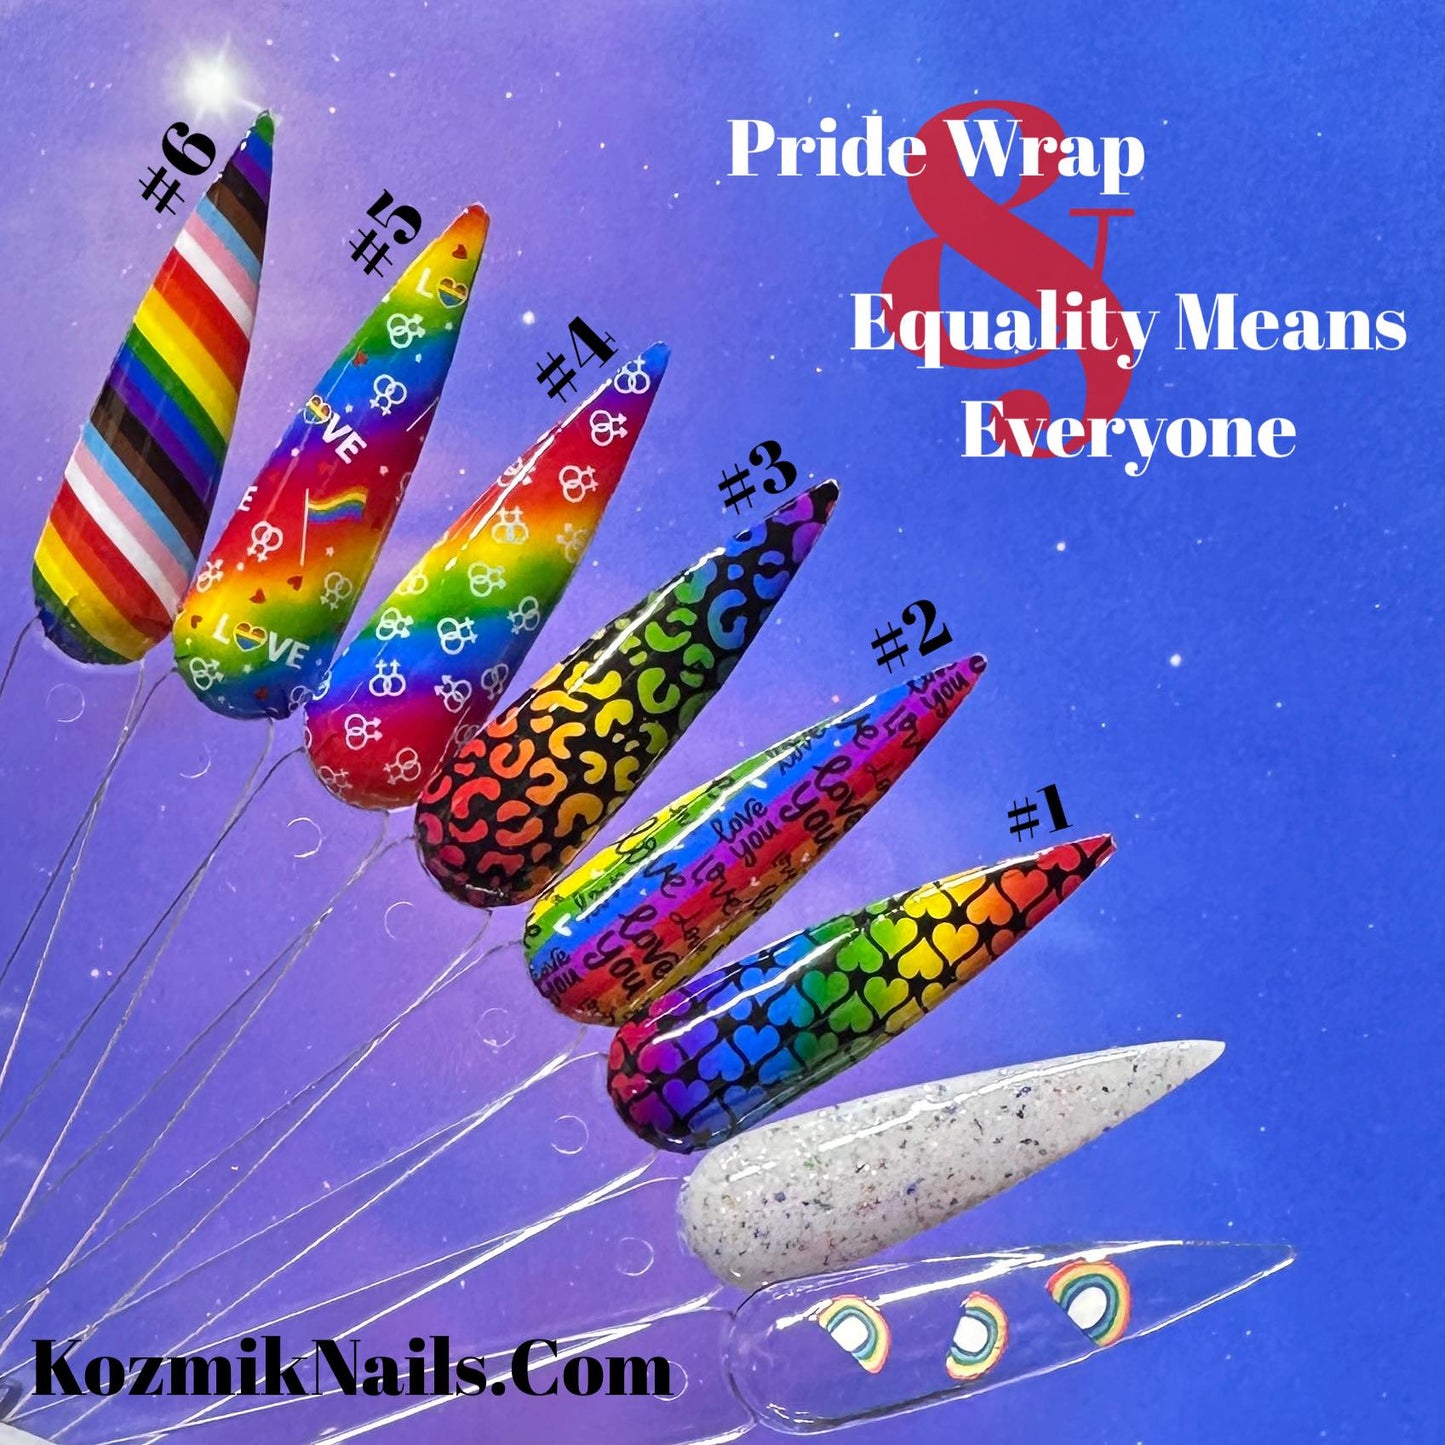 Equality Means Everyone / Pride Wrap Duo